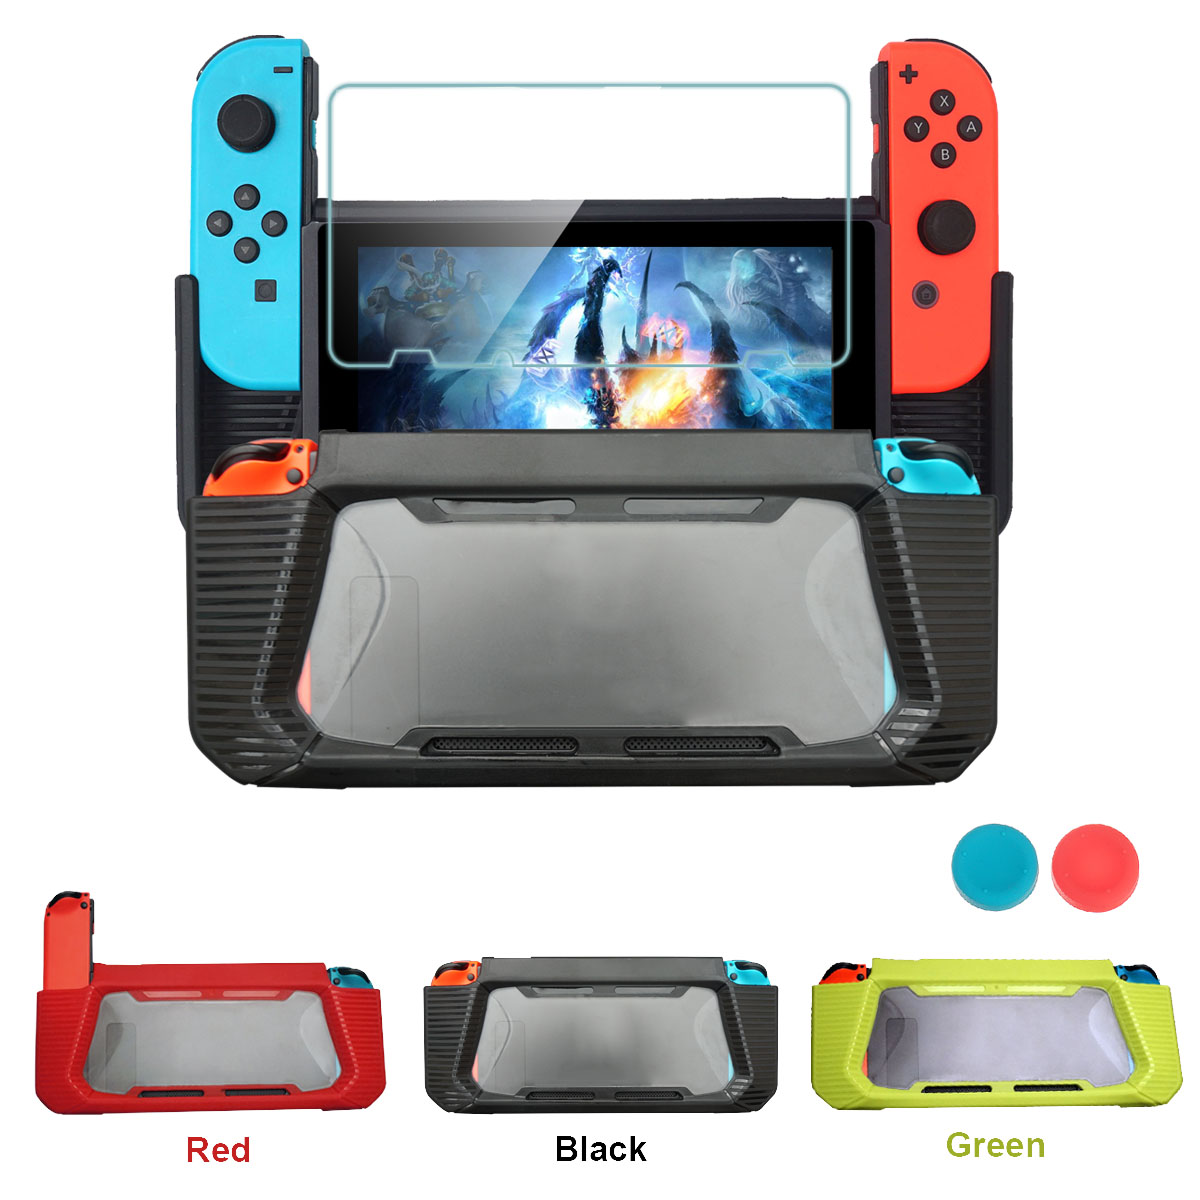 Backboard-Radiator-Hard-Cover-Shell-Hybrid-Protective-Case-For-Nintendo-Switch-Game-Console-1454633-1